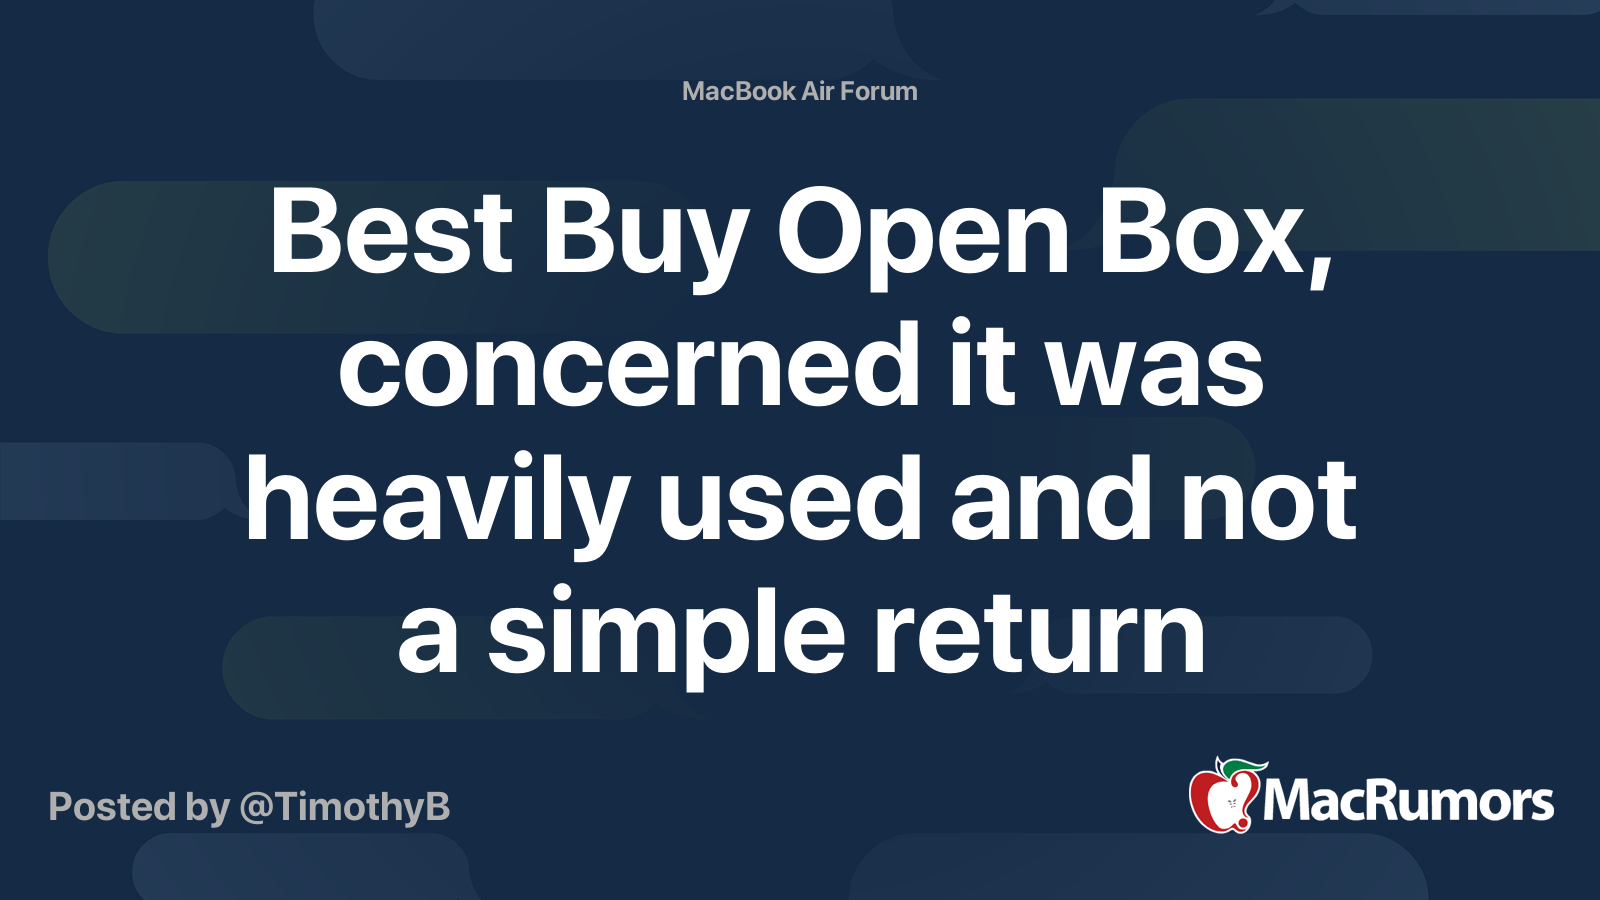 Here's why I won't buy a Best Buy Open Box product - dupeVS